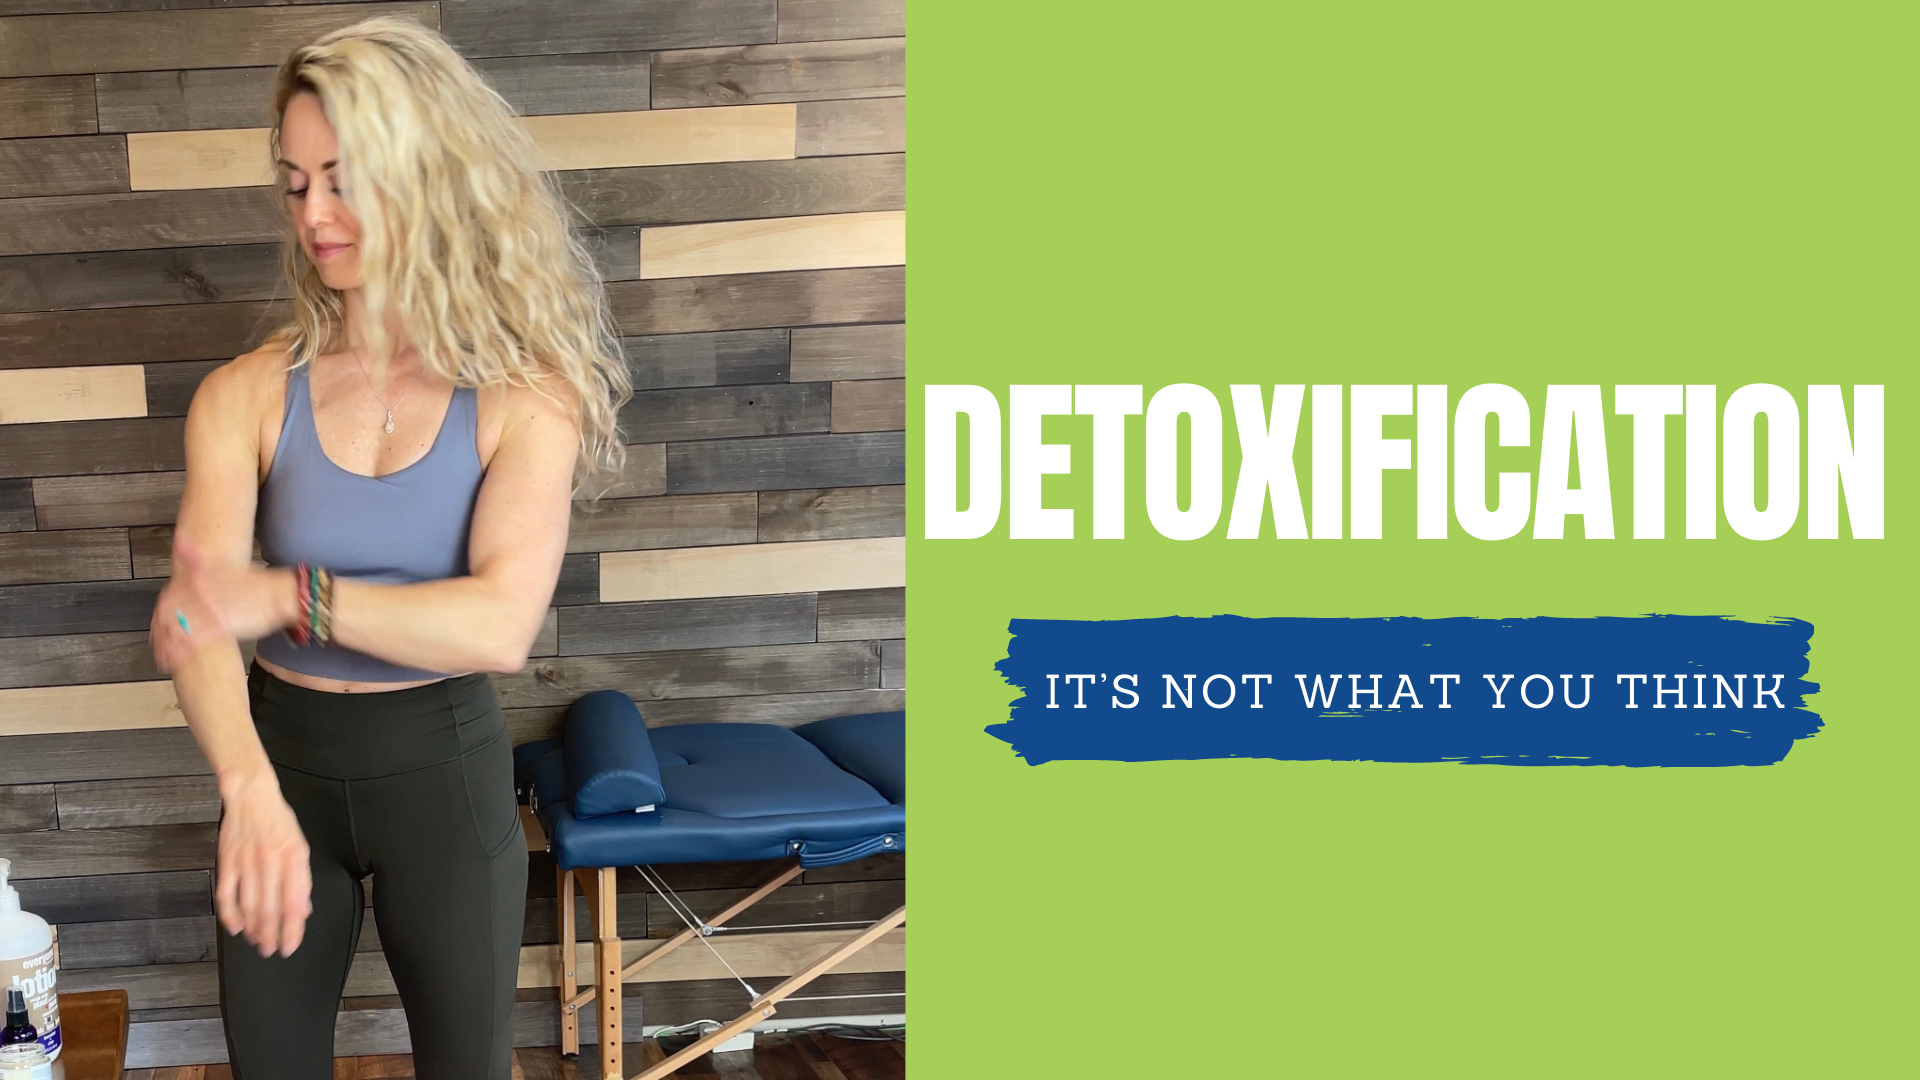 Detoxification… it’s not what you think￼￼